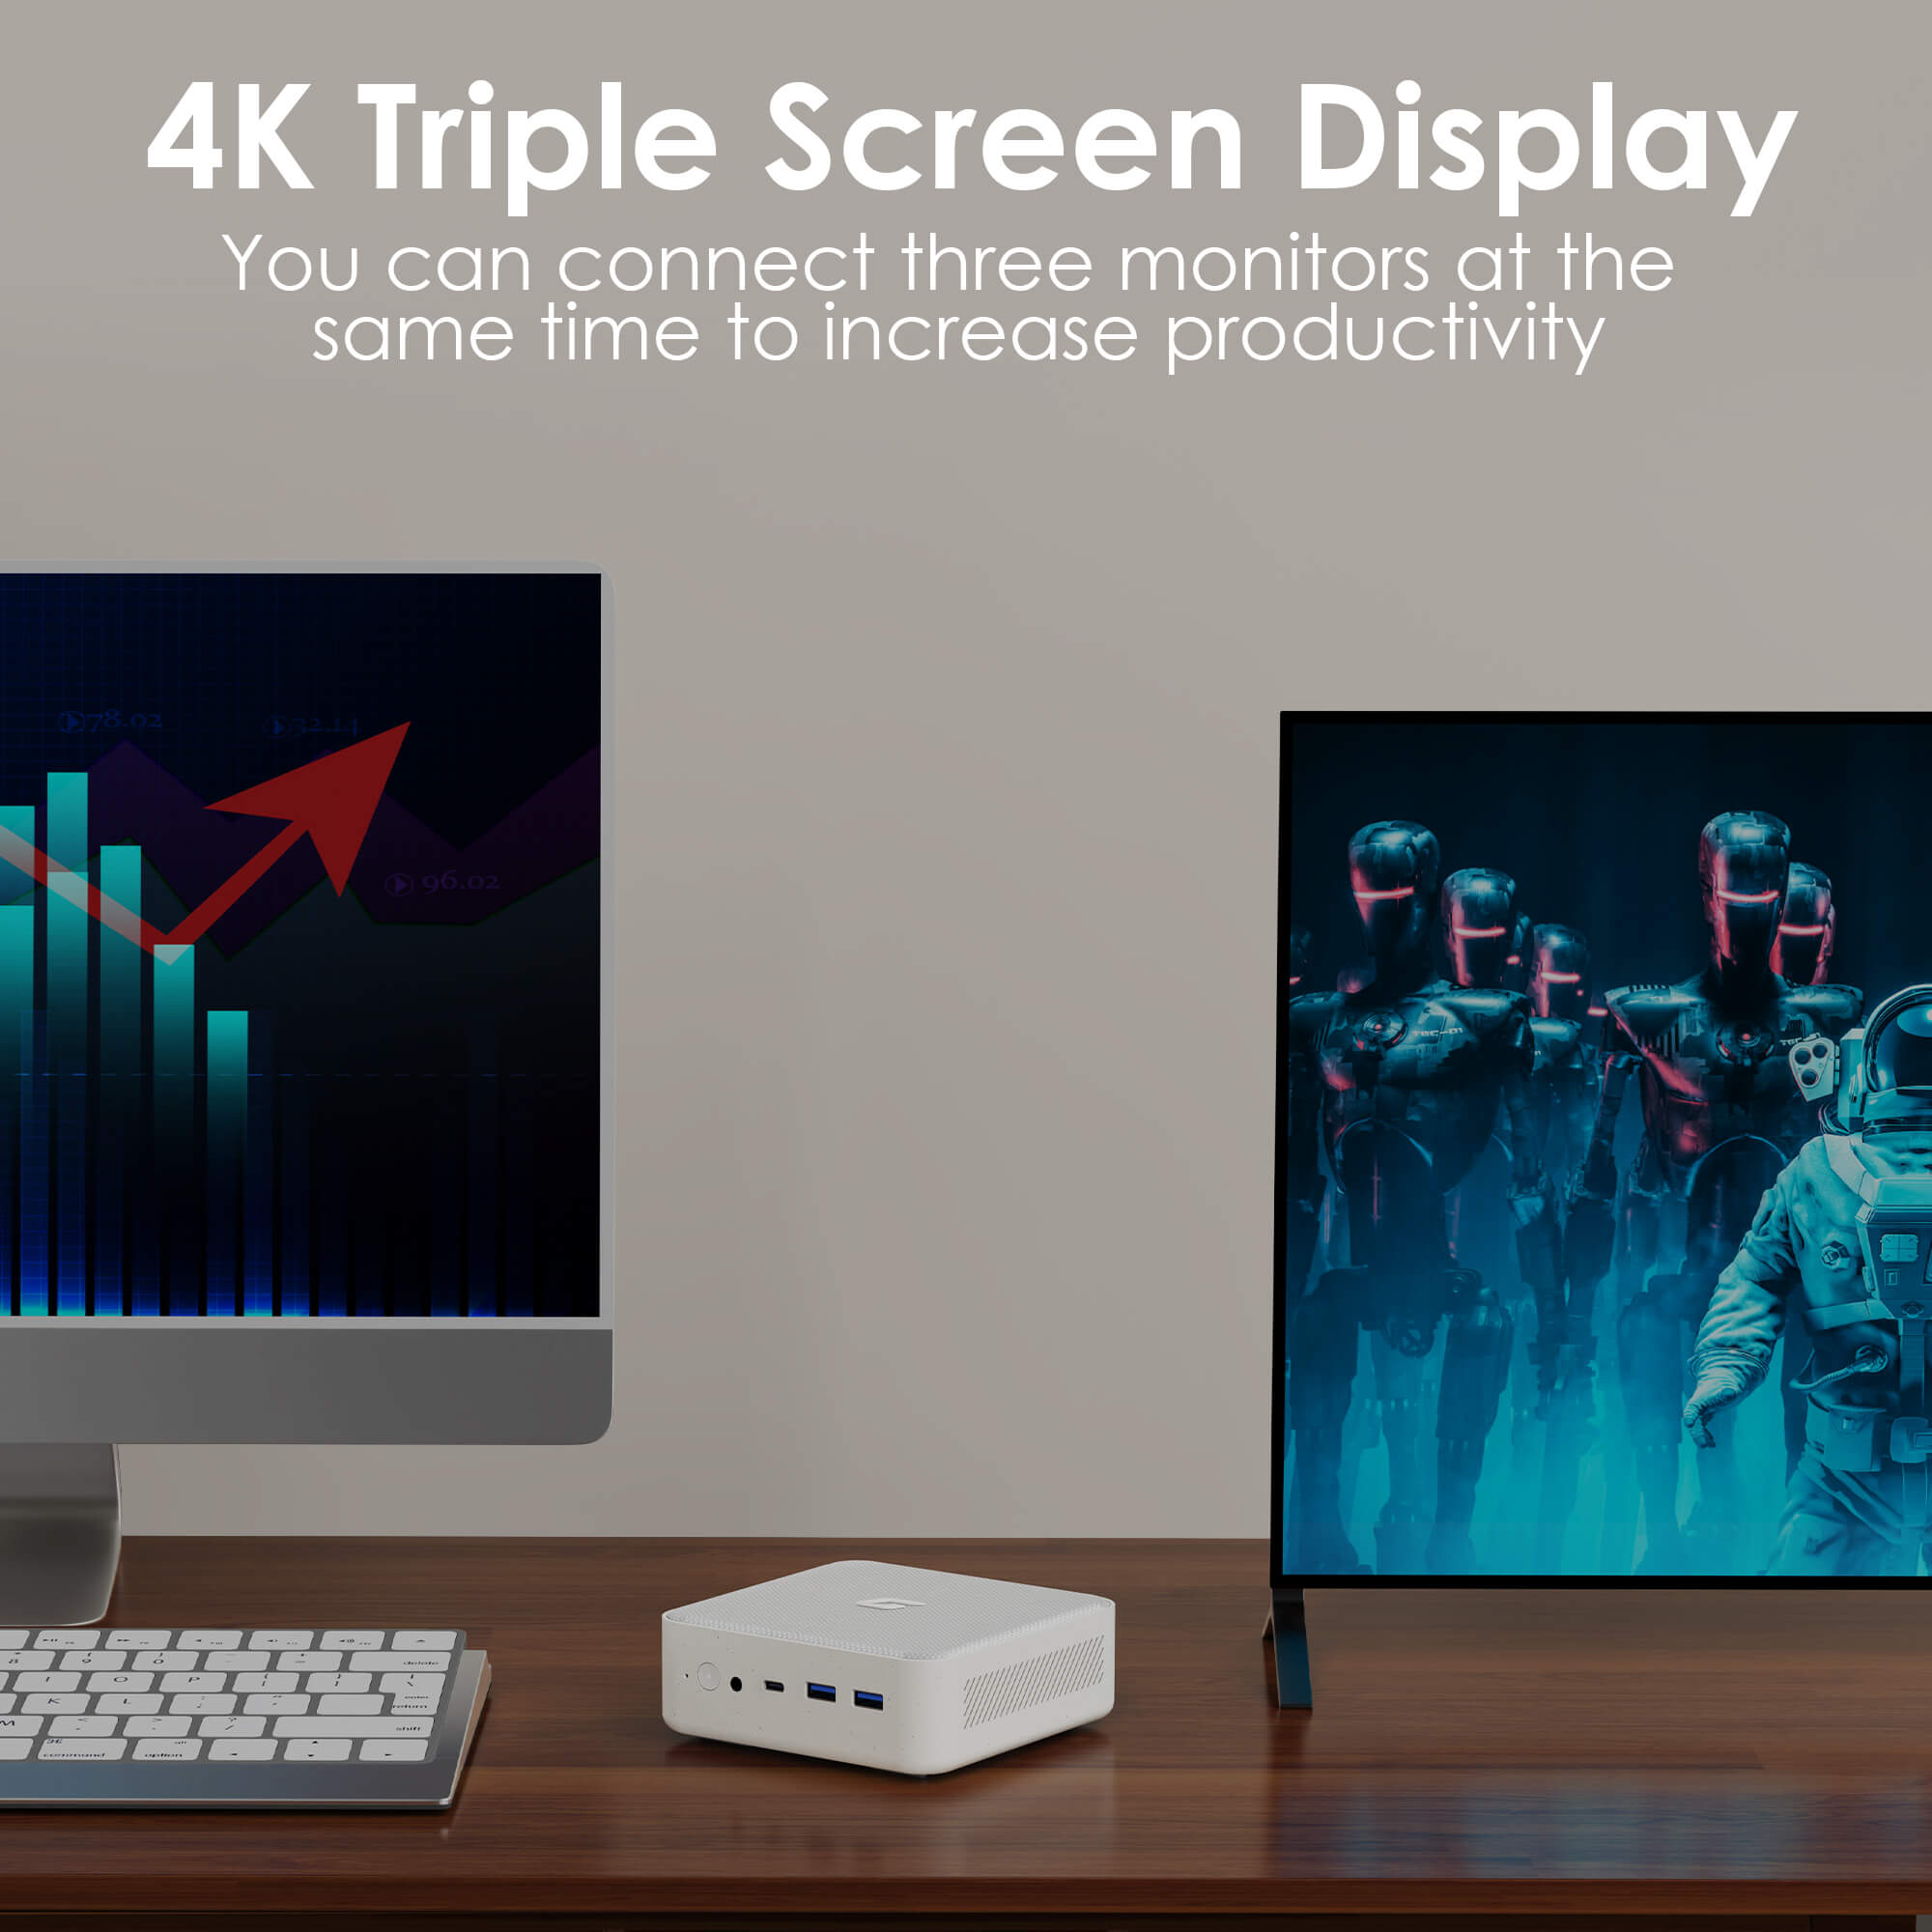 The DP+HDMI2.0+Type-C interfaces support triple-screen output at 4K UHD resolution